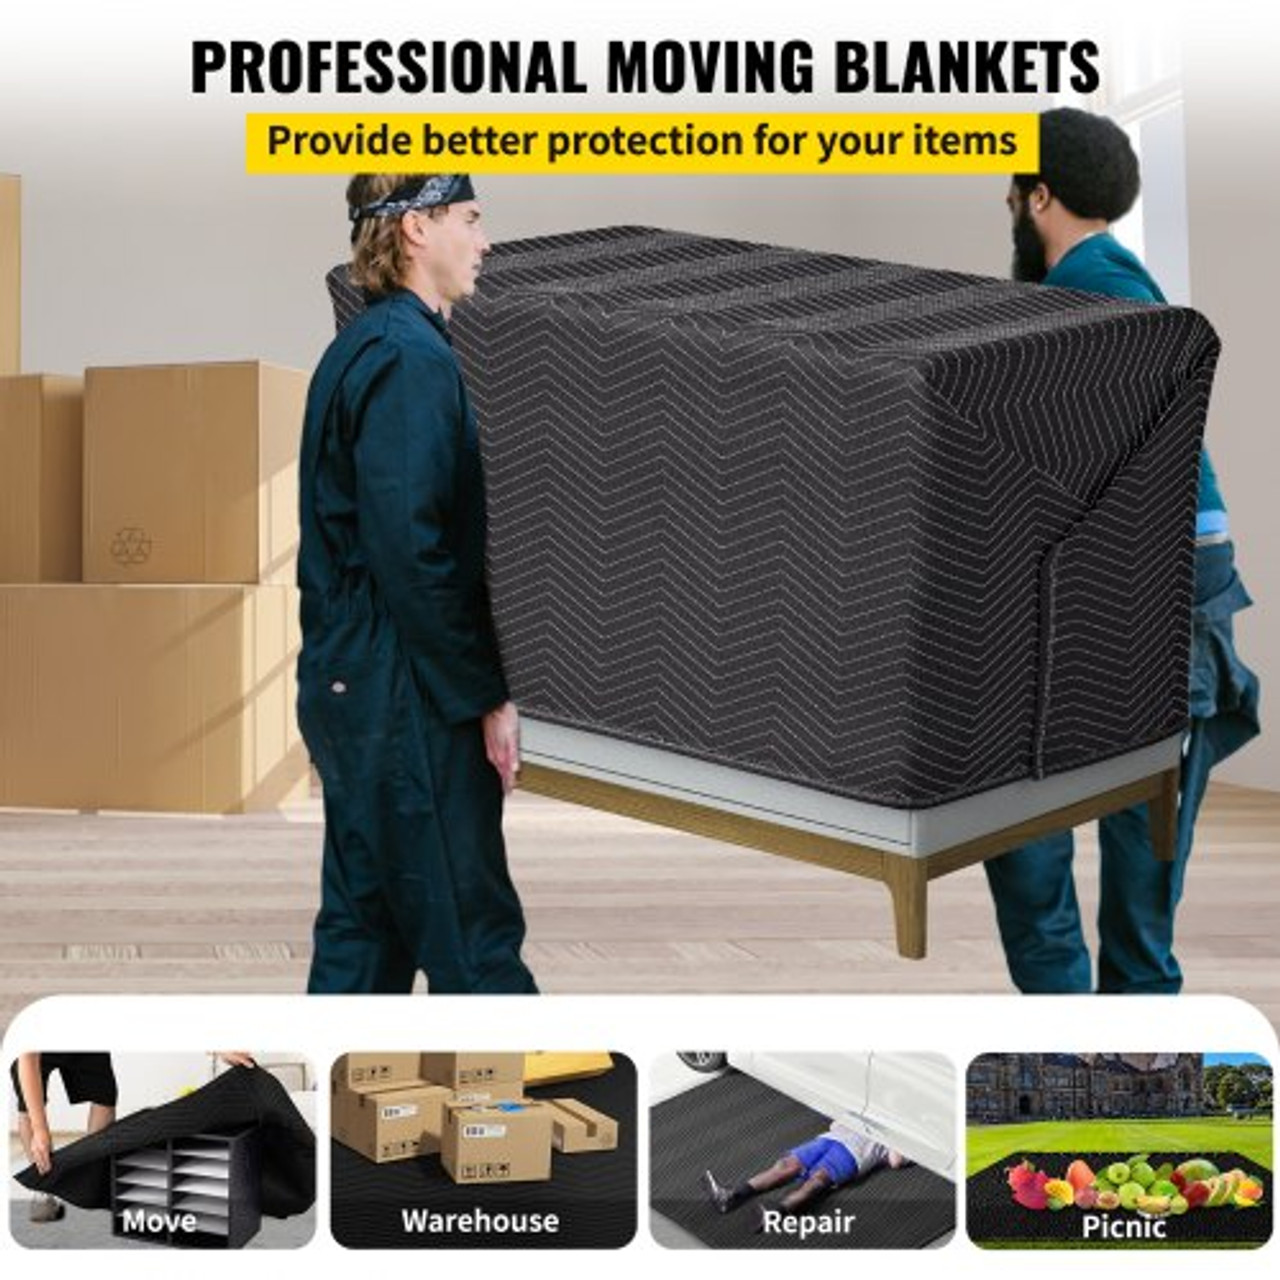 Moving Blankets, 80" x 72" (45 lb/dz Weight)-6 Packs, Professional Non-Woven & Recycled Cotton Packing Blanket, Heavy Duty Mover Pads for Protecting Furniture, Floors, Appliances, Black